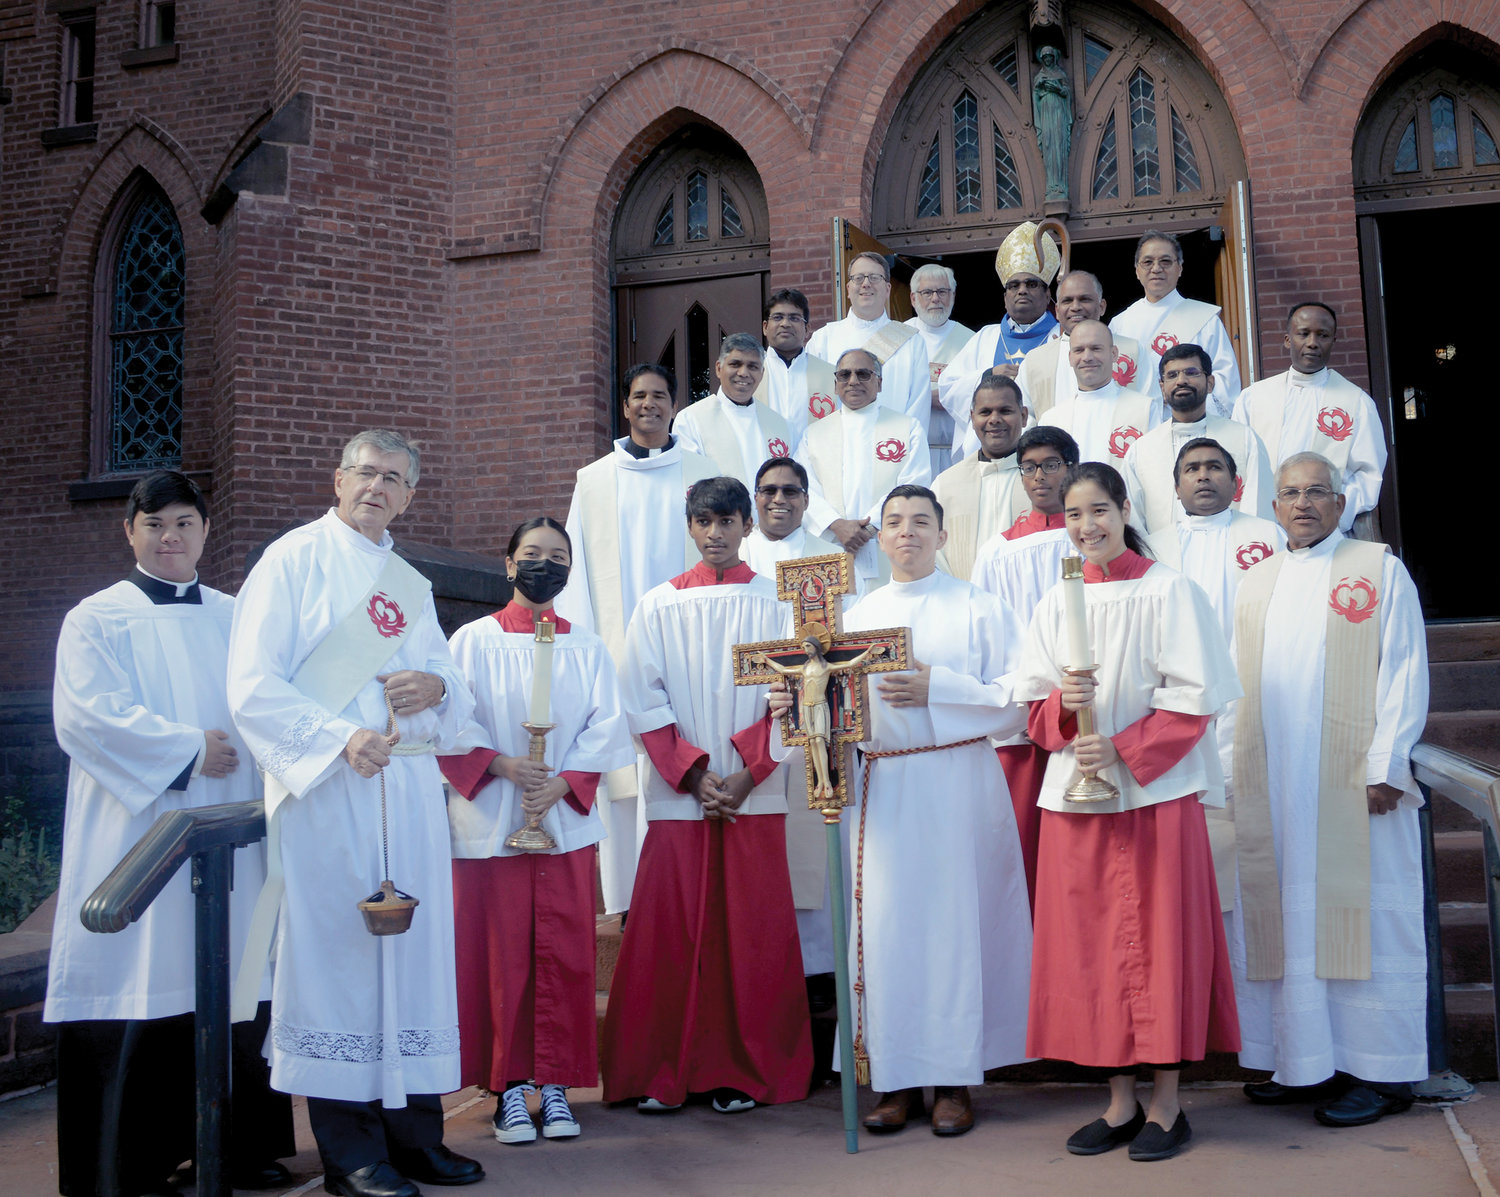 A group photo is taken after Mass.